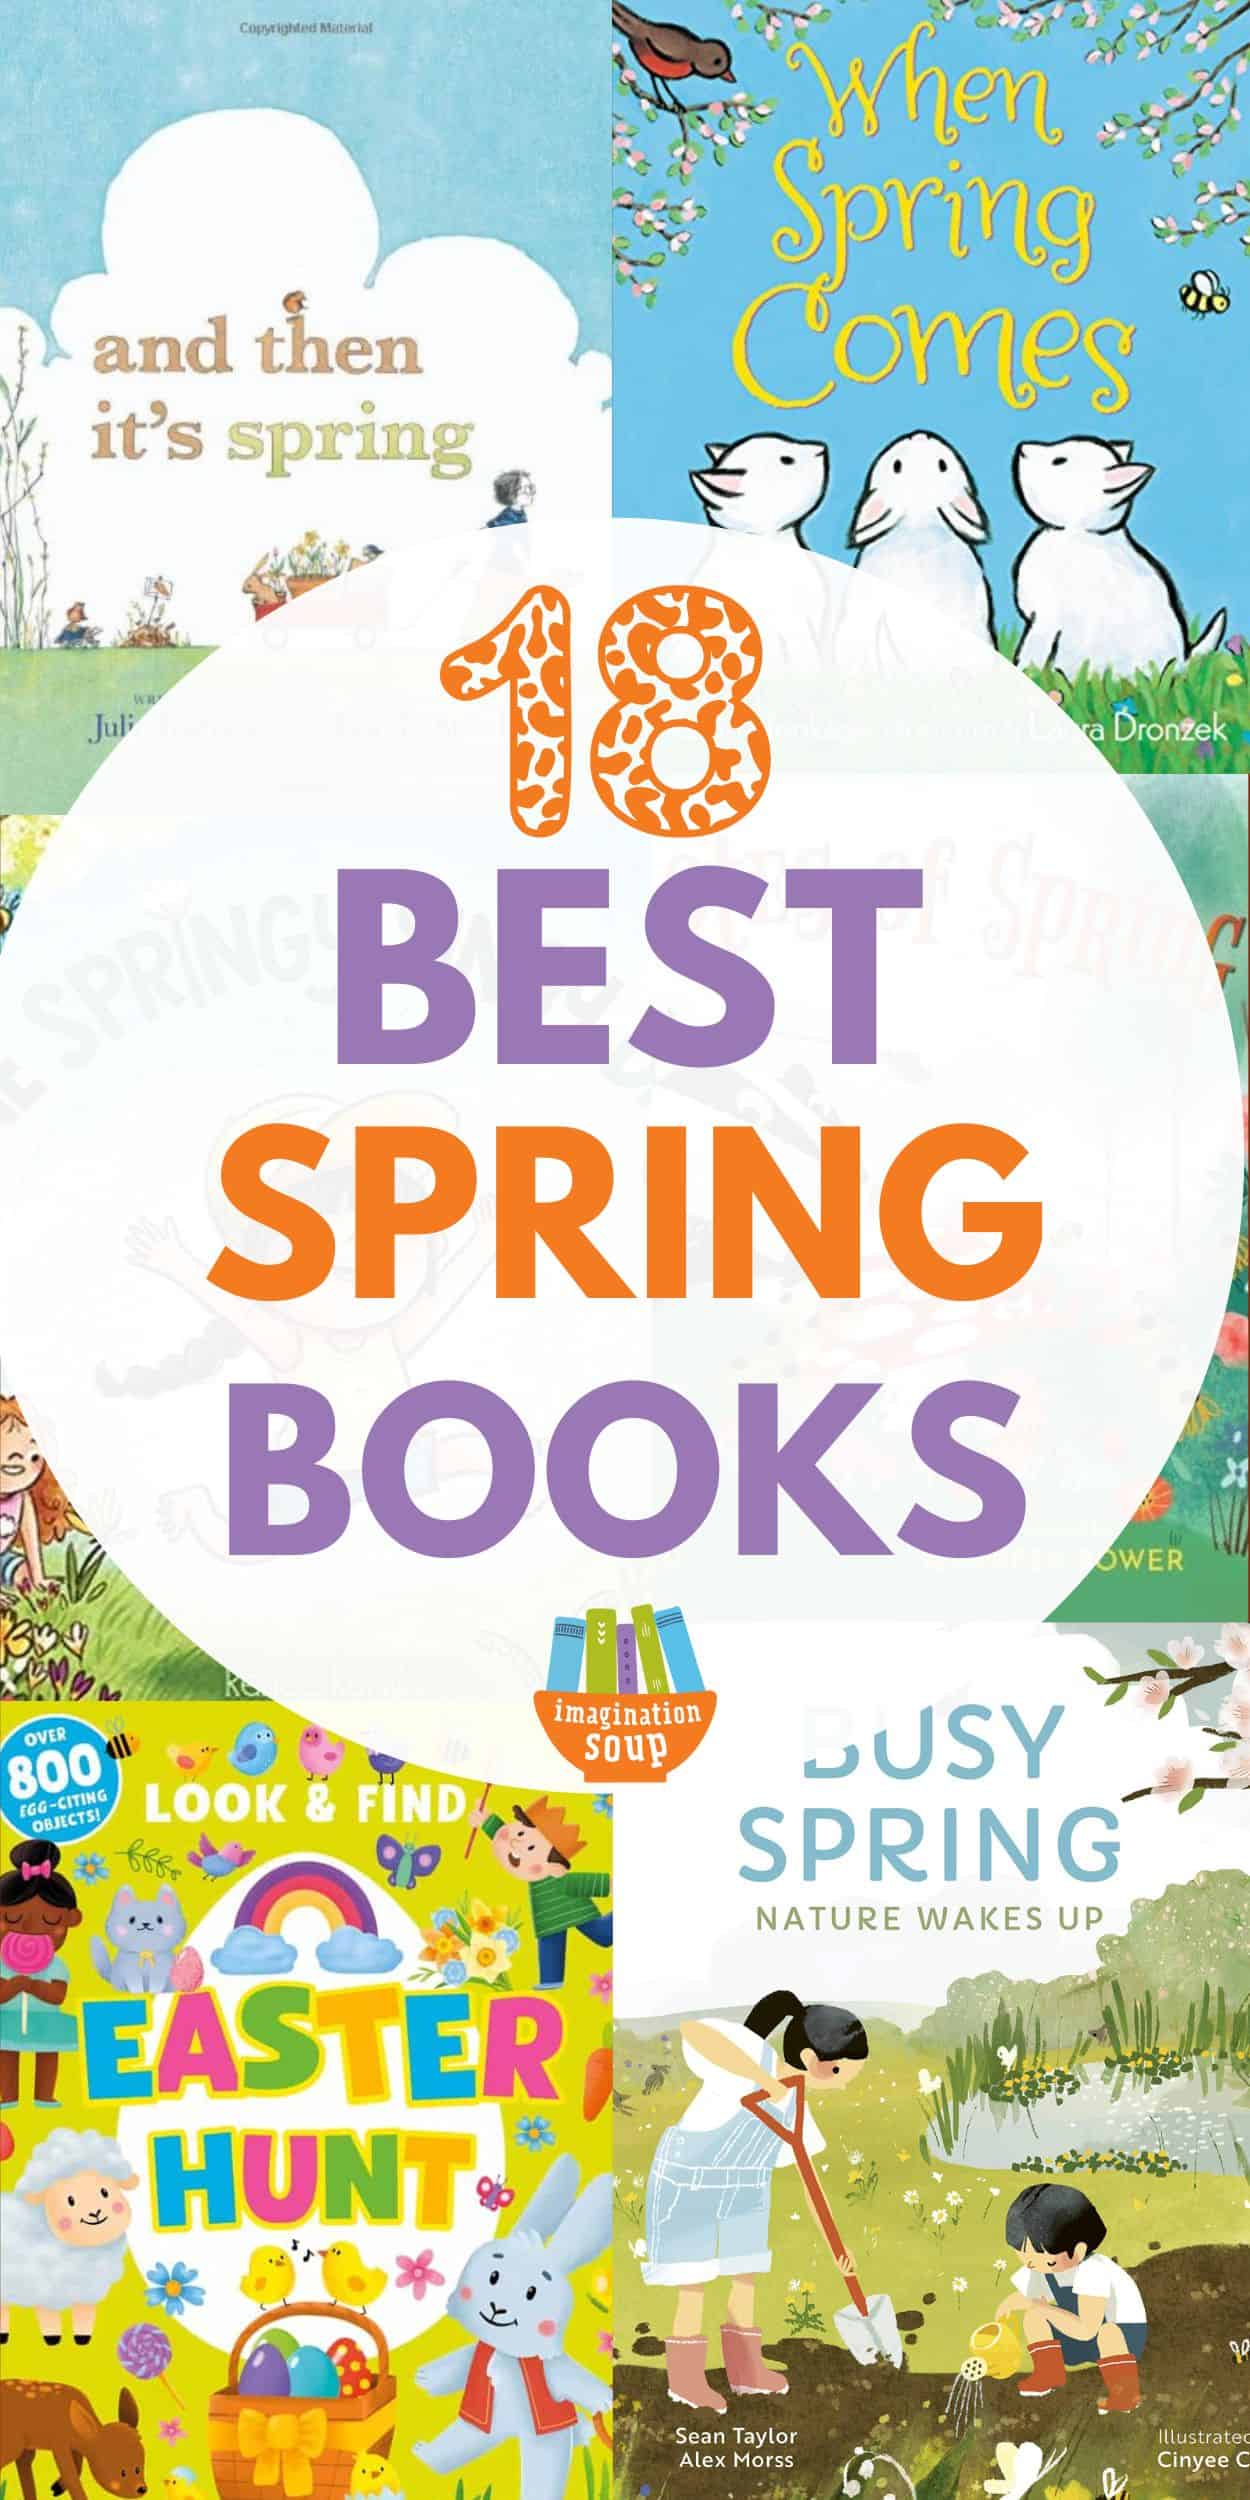 Introduce your children to the wonder of the spring season with good spring read alouds. These favorite children's picture books about spring give young kids important life skills and knowledge. After you read aloud some of these books, then try the fun spring scavenger hunt!